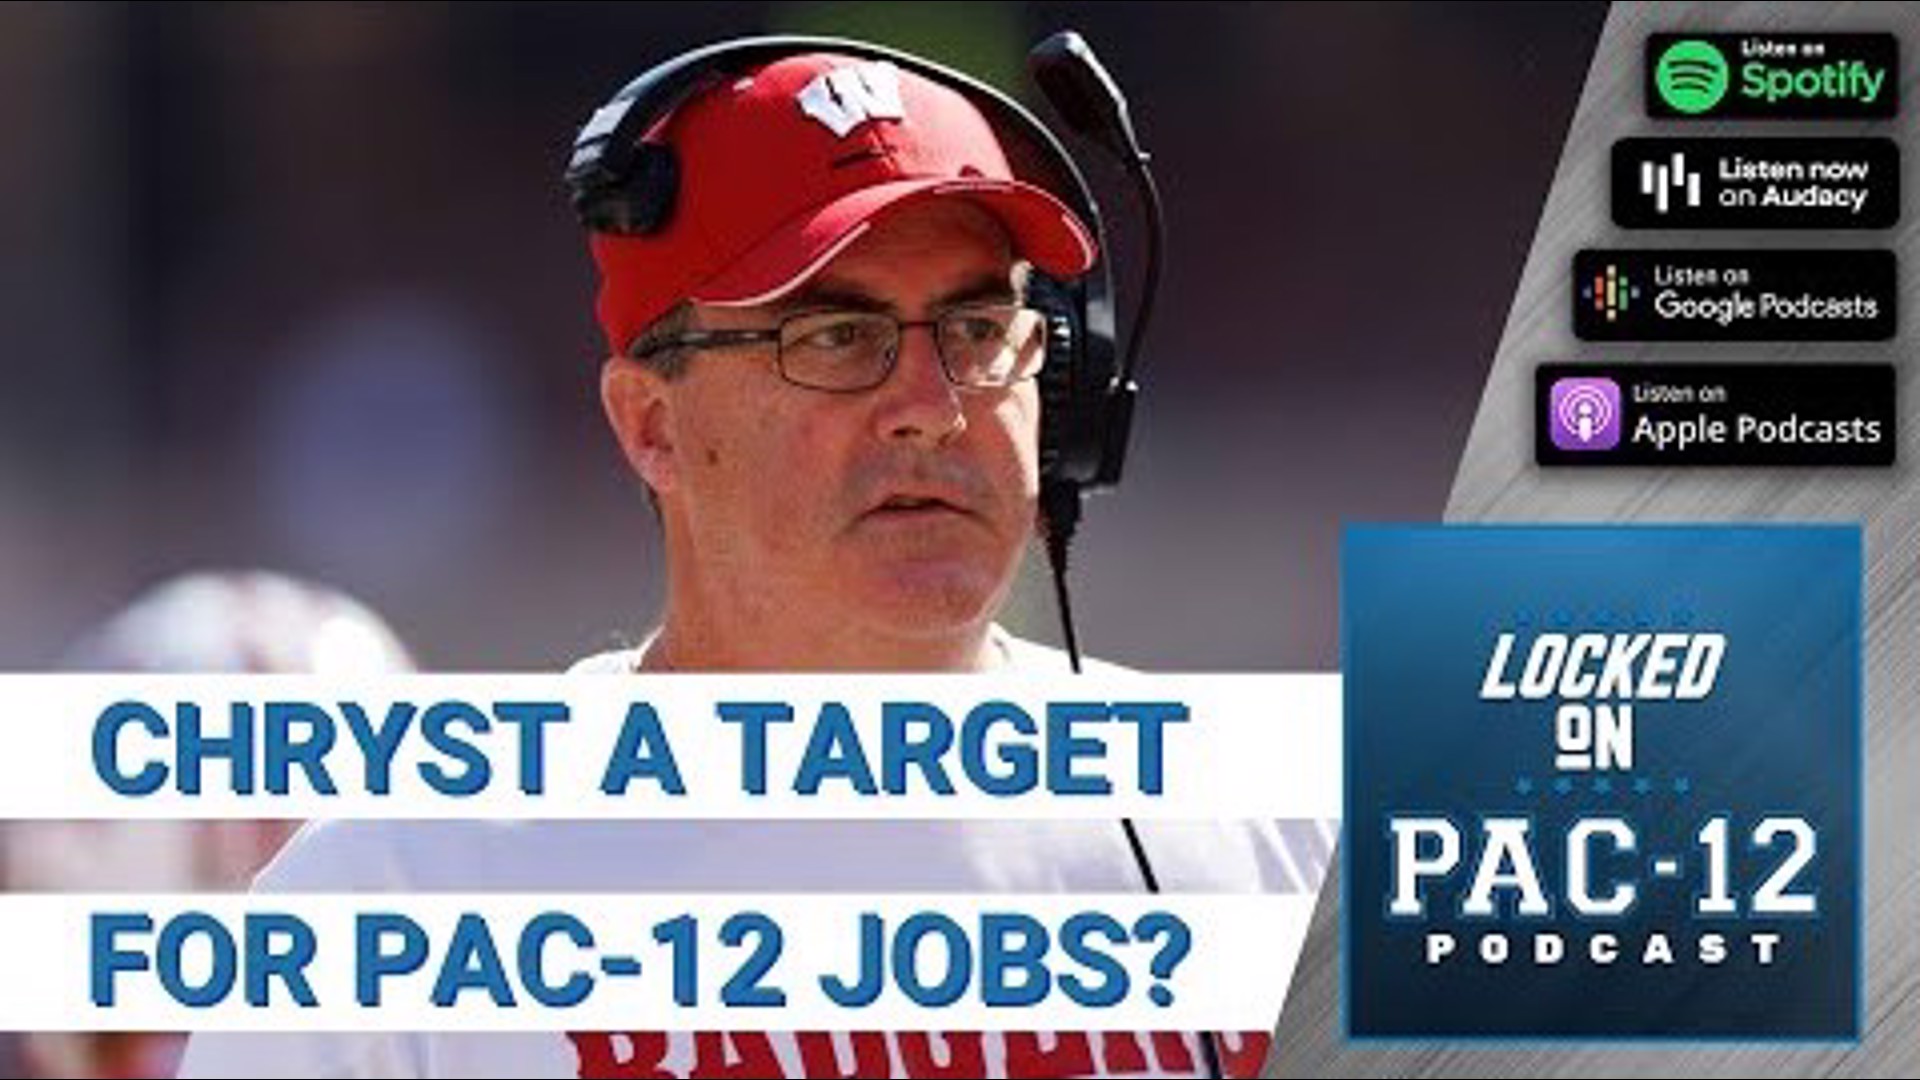 After a combined start of 1-9, Colorado and Arizona State football are looking for new head coaches. The Buffaloes might want to consider Paul Chryst.